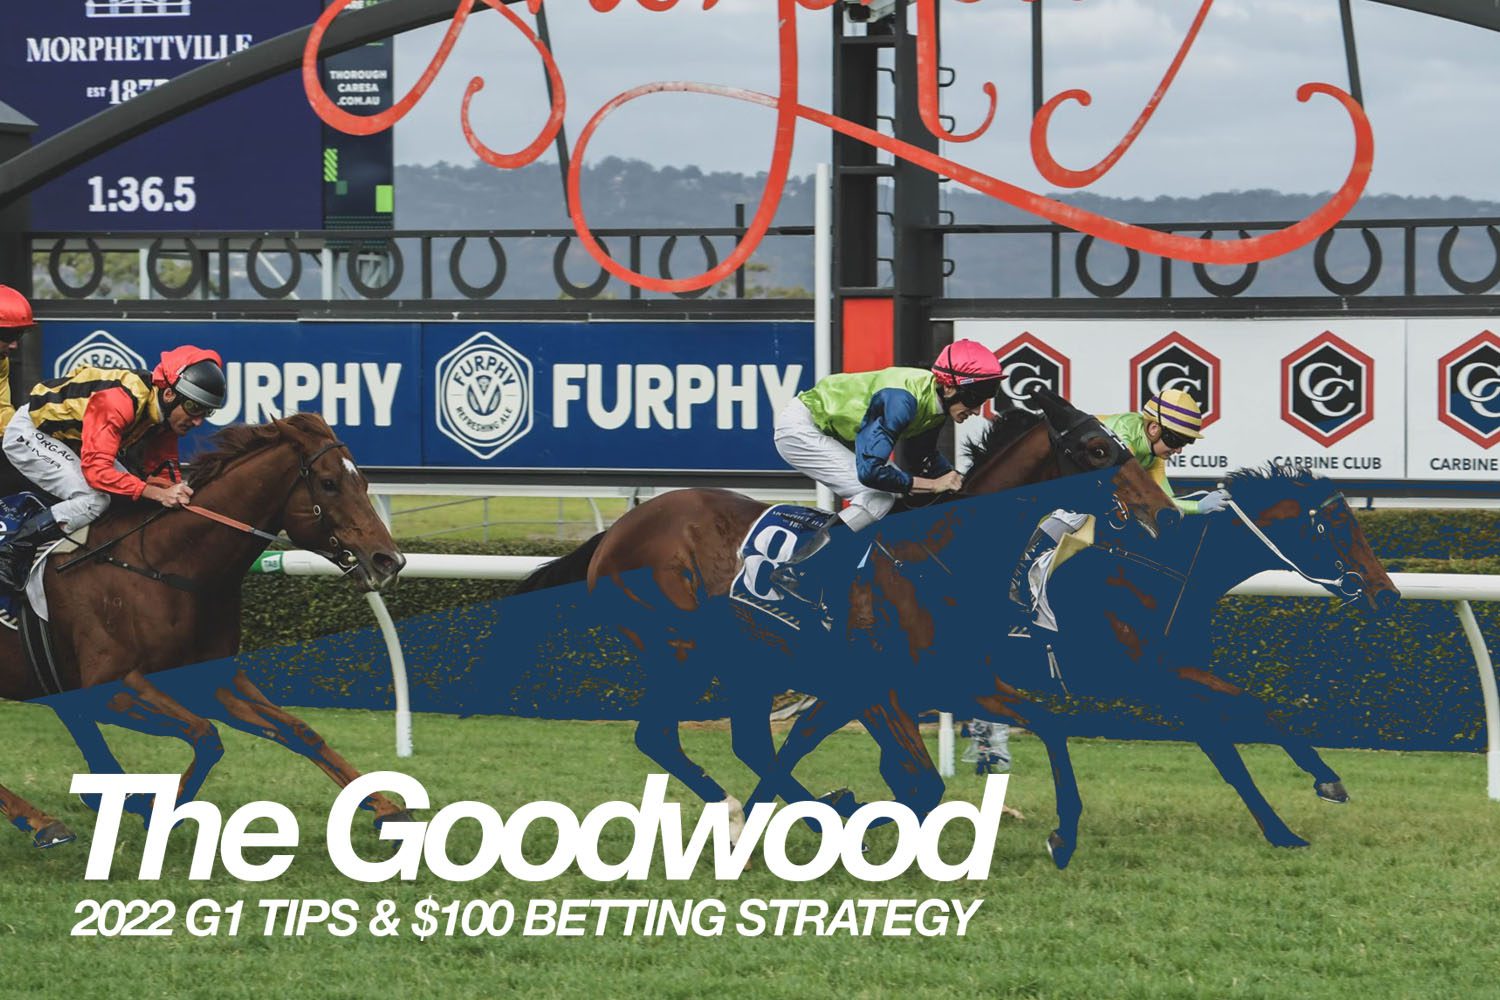 The Goodwood betting tips